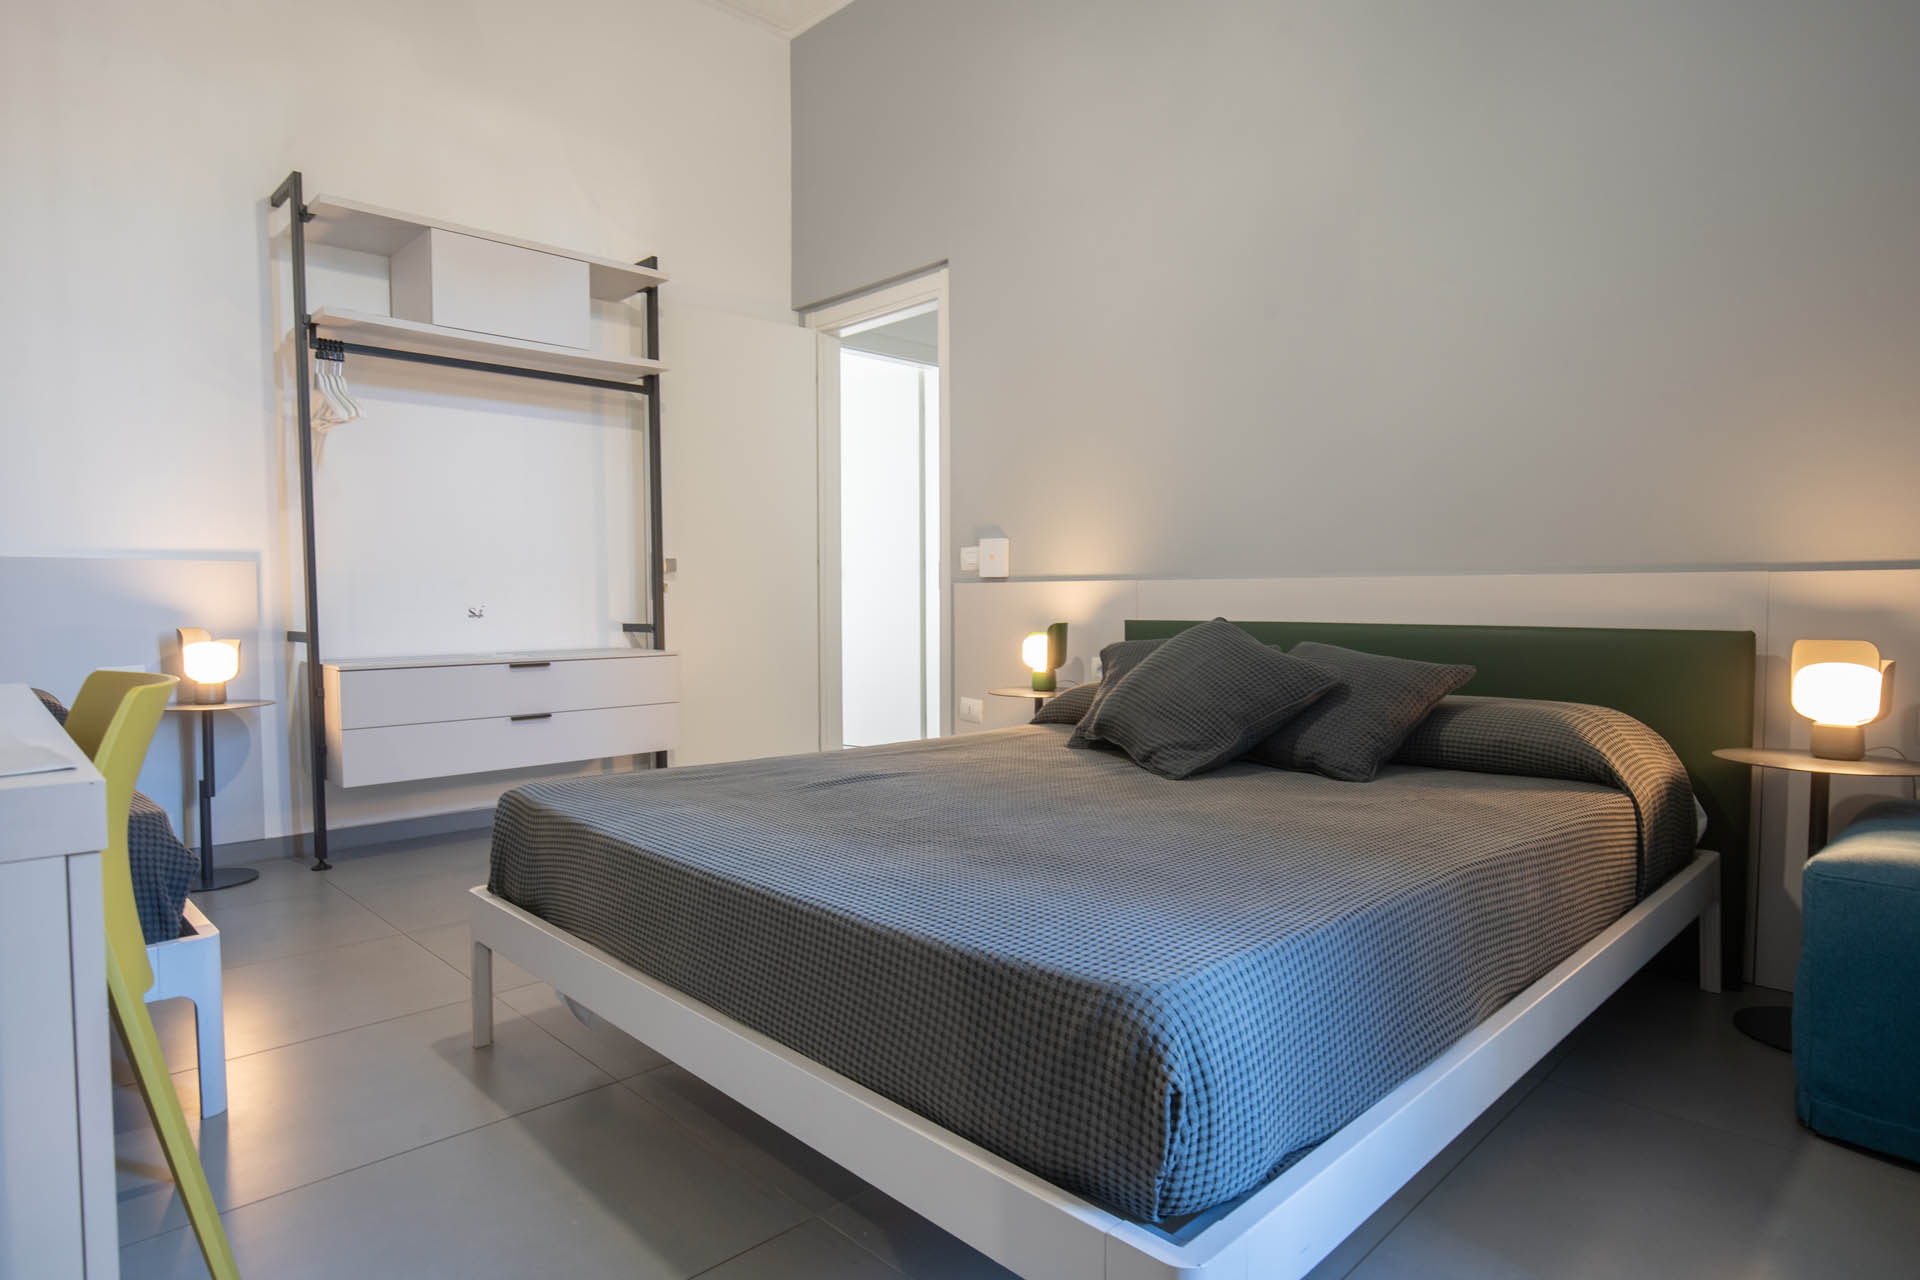 Our comfortable rooms for your stay in Catania